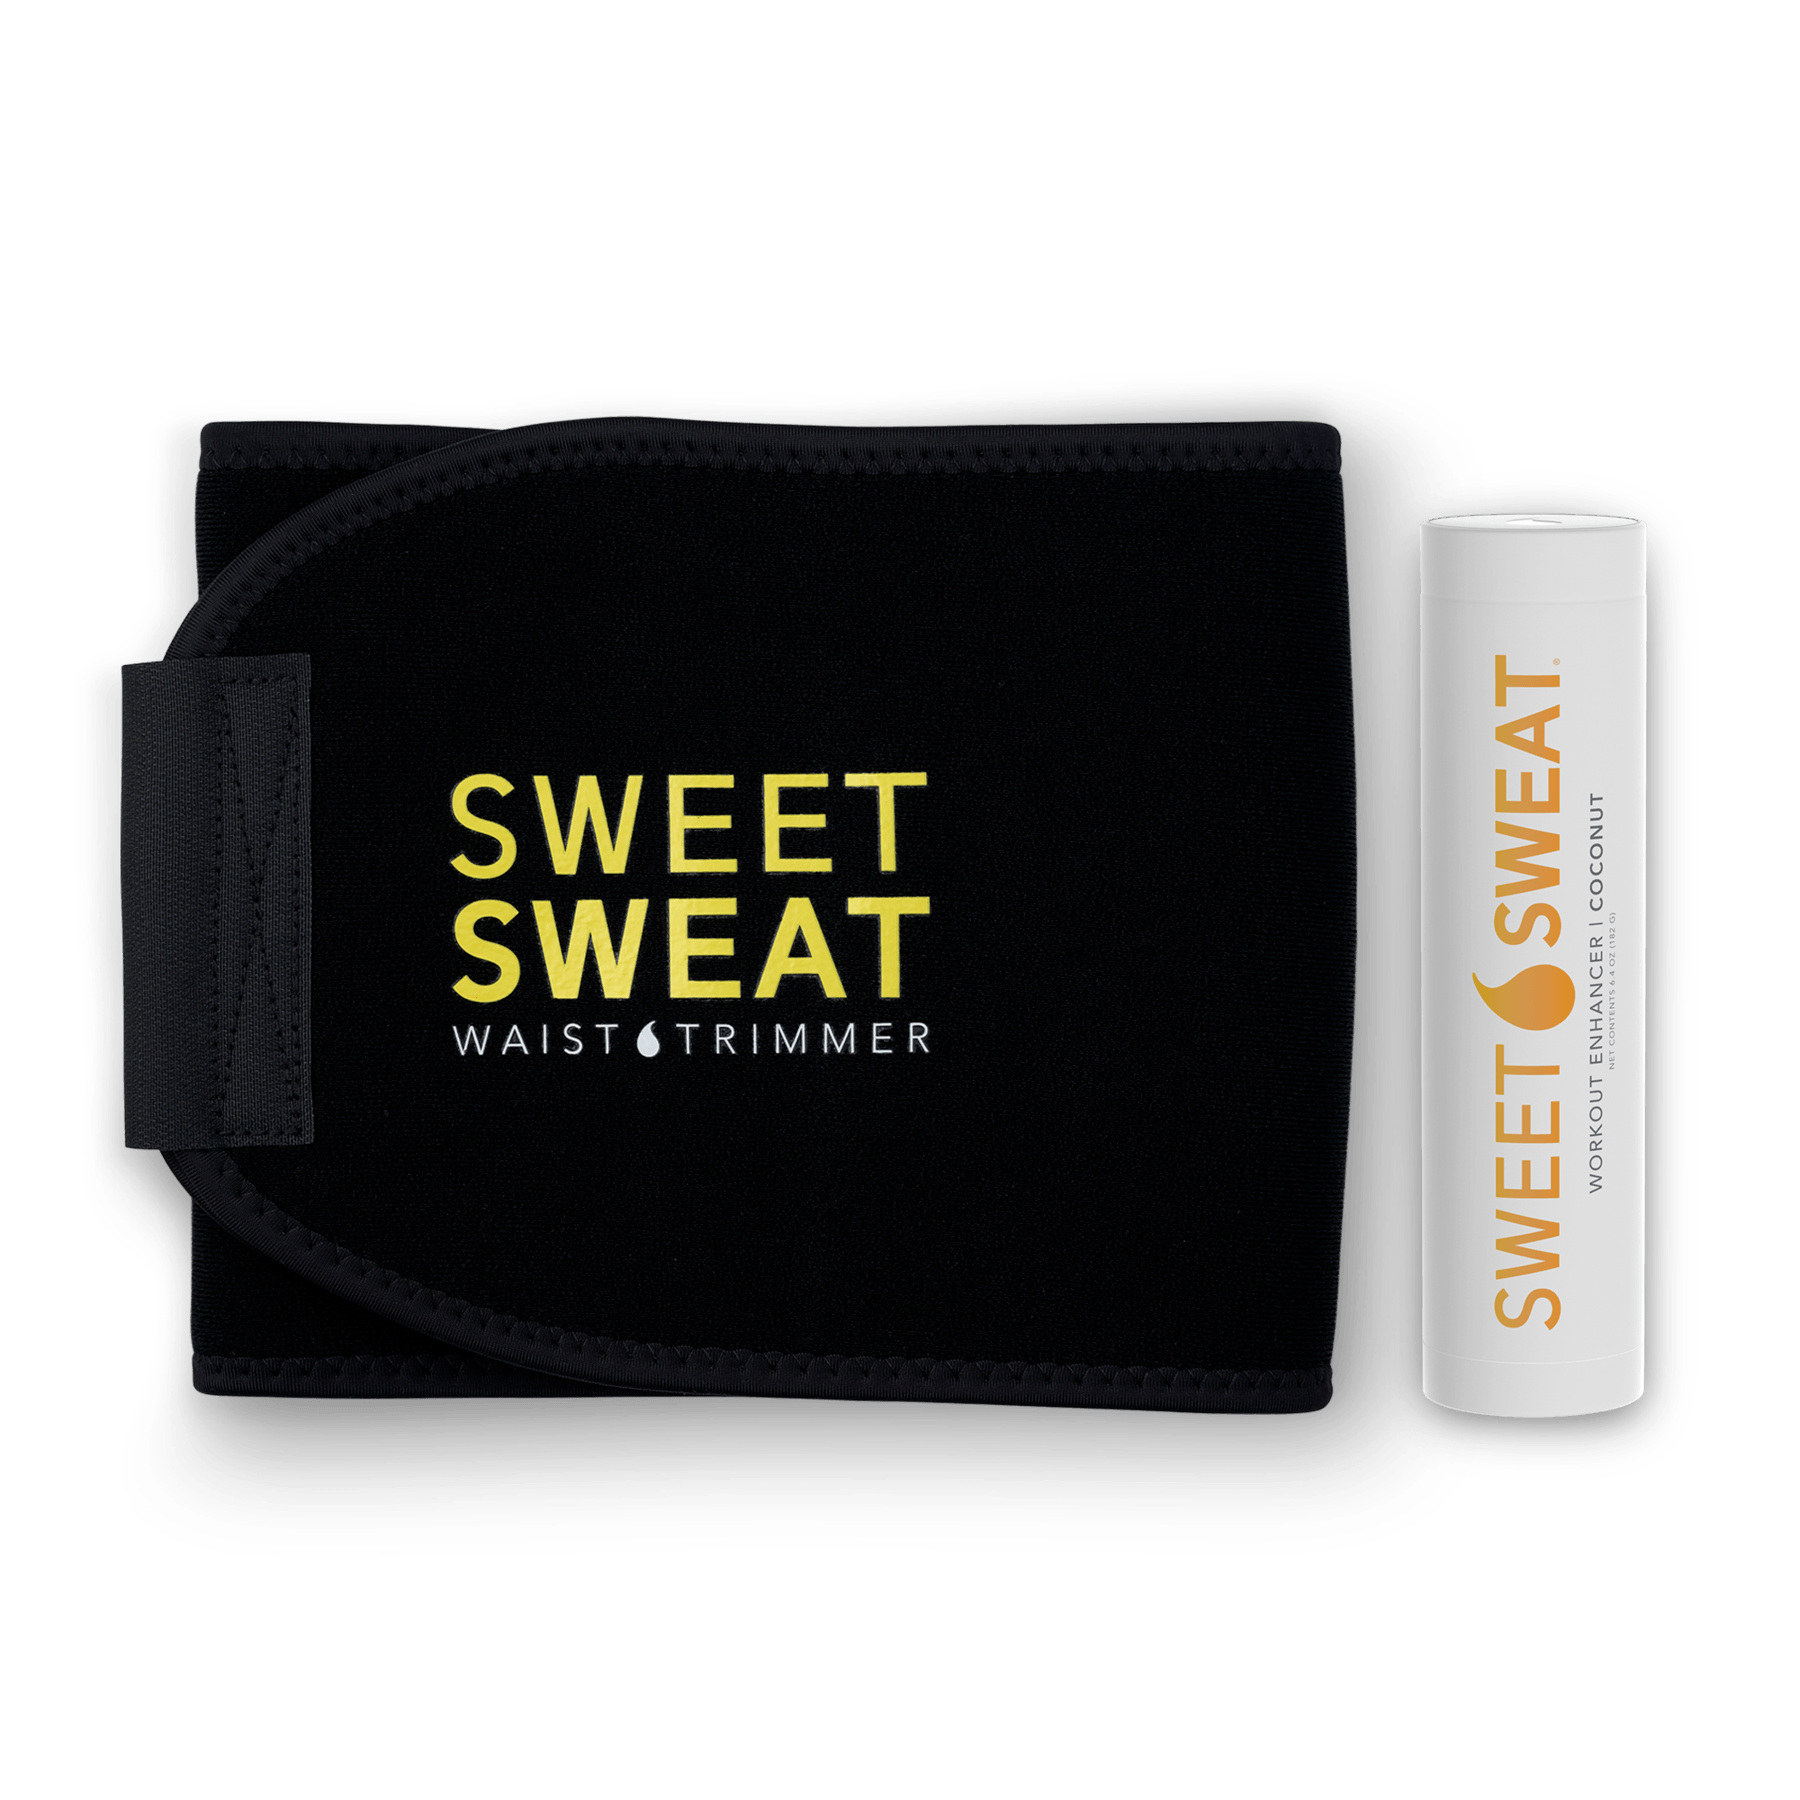 Sweet Sweat® Bundle with Trimmer & Sweet Sweat® Stick by Sweet Sweat - sweet sweat workout kit - sweet sweat workout kit - sweet sweat workout kit - sweet sweat workout kit -.